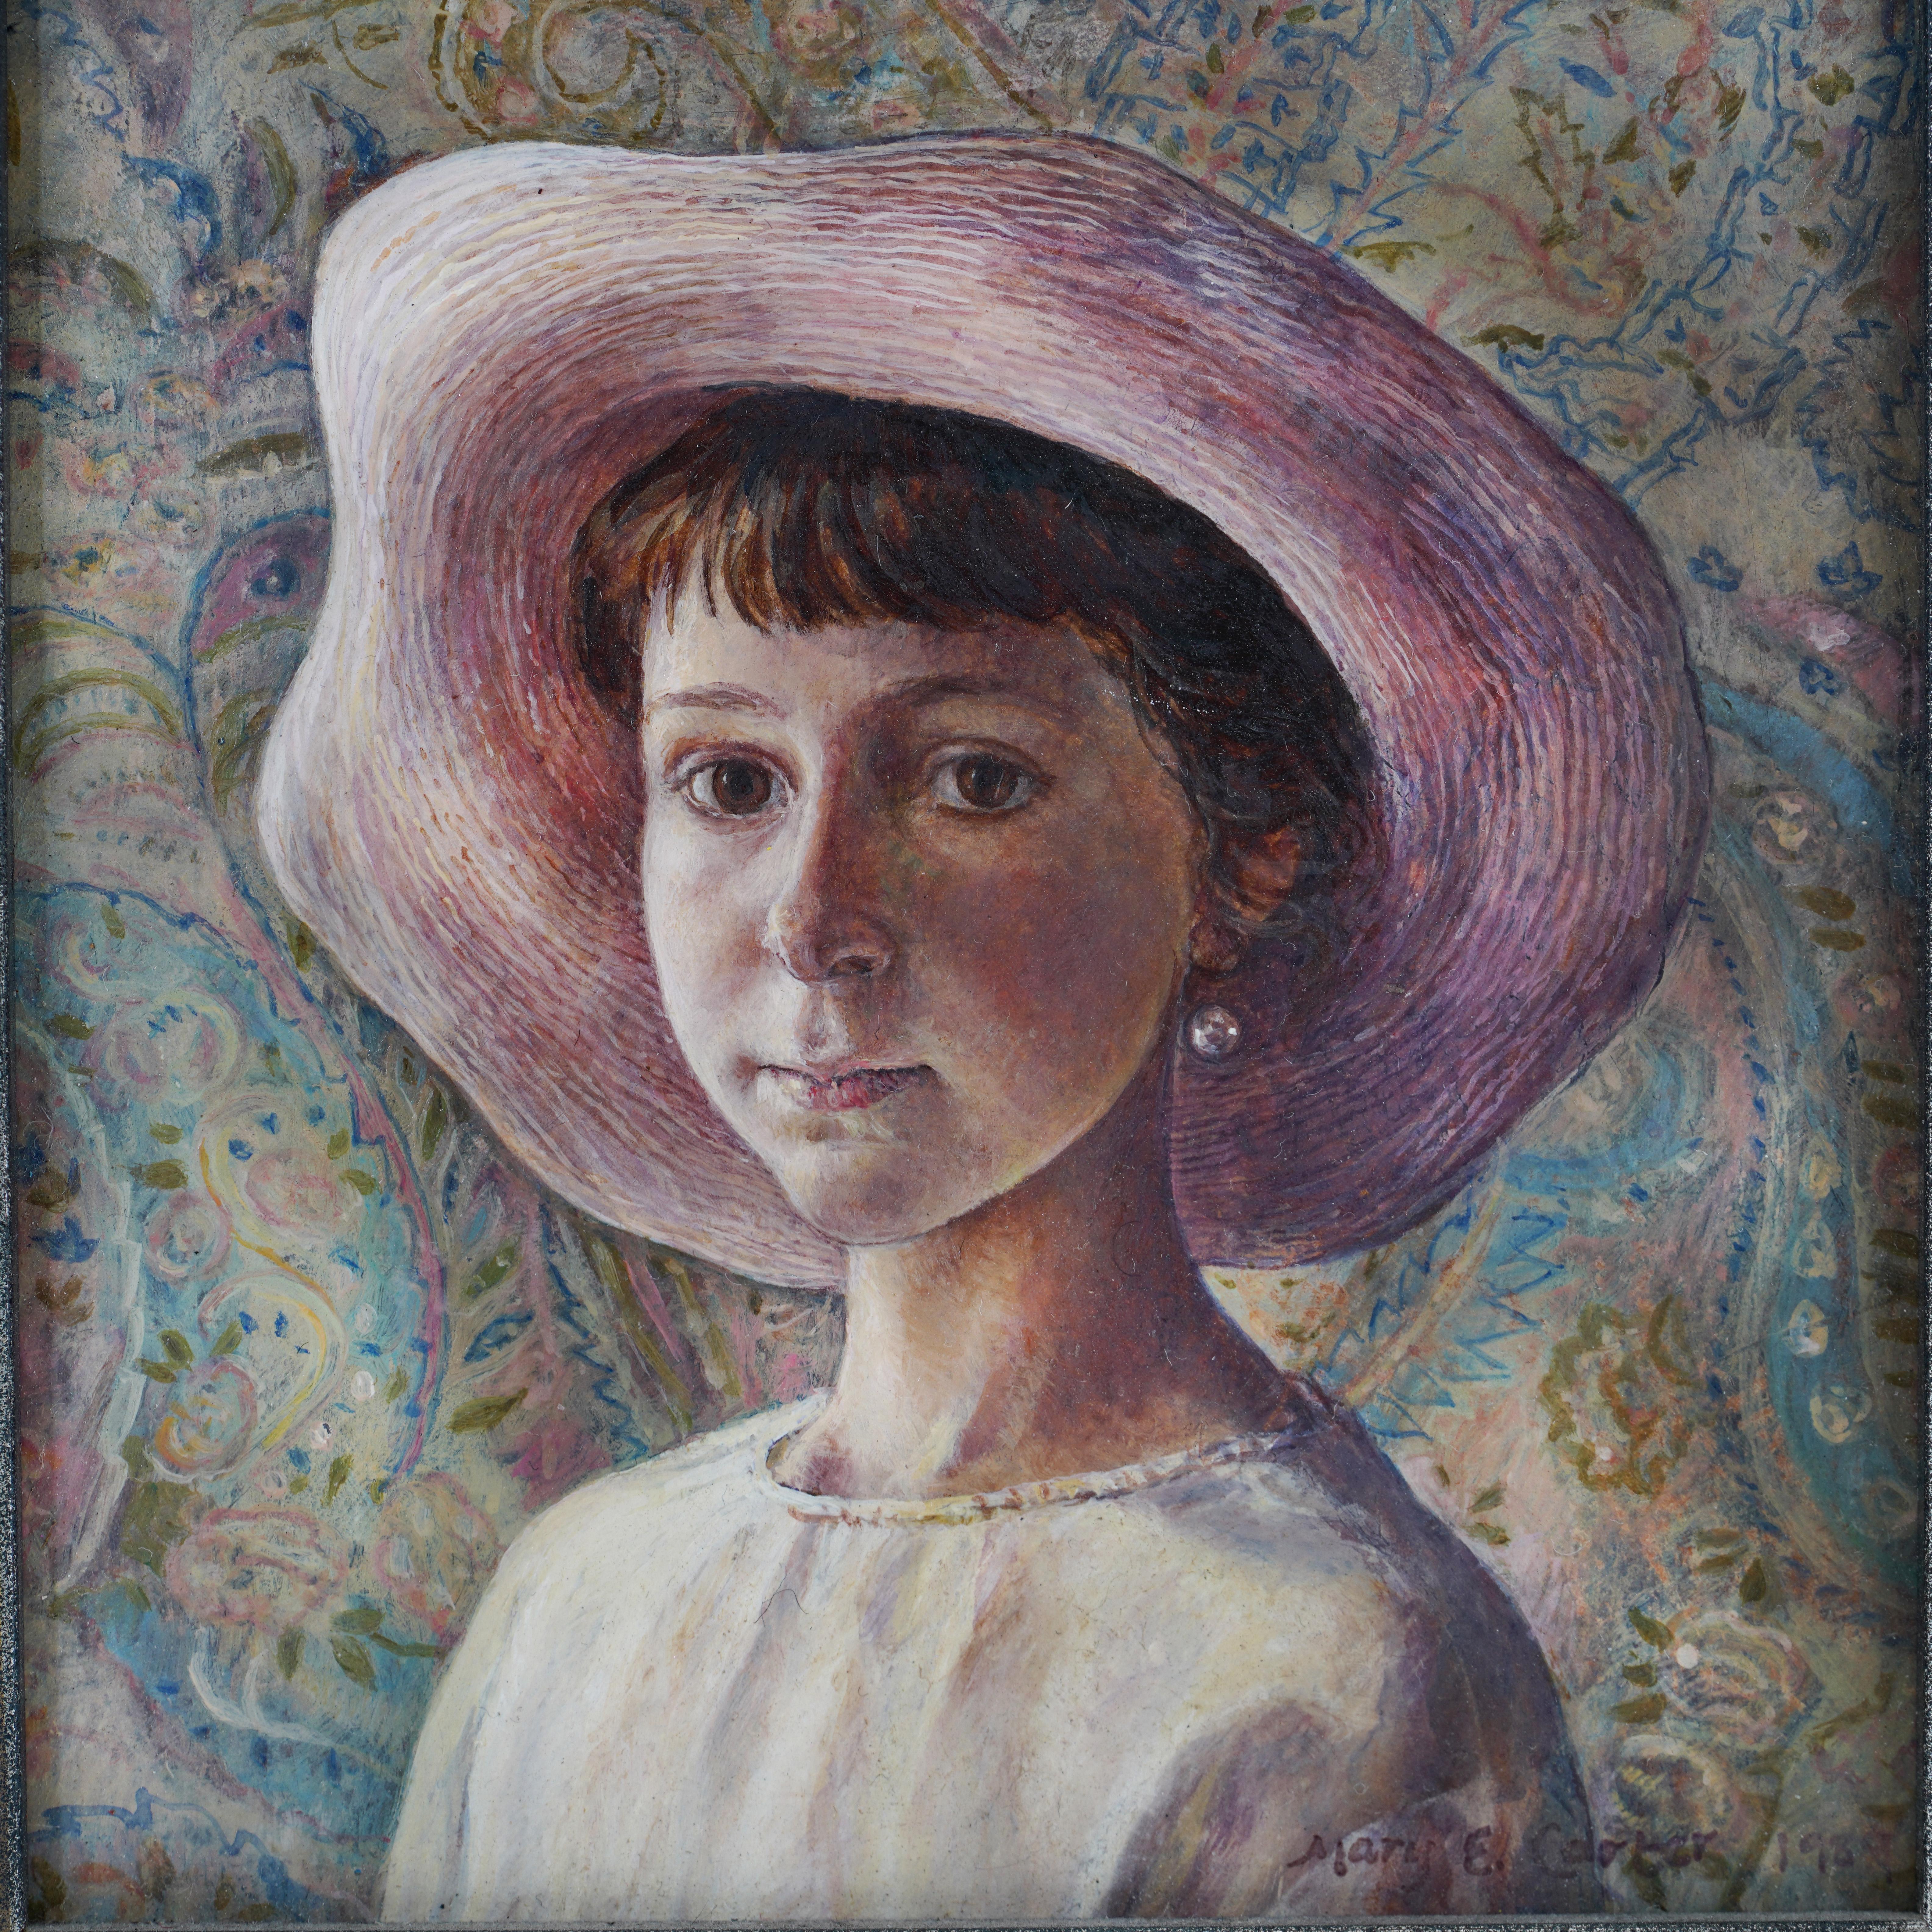 Vintage Mary E Carter oil on canvas painting of a girl with a hat.
Made in England, 1989
Hand signed.

Dimensions:
Actual painting size: 8 cm in width and 8.5 cm in height
Painting with a frame: 15 cm in width and 15.2 cm
Weight: 163 grams

About